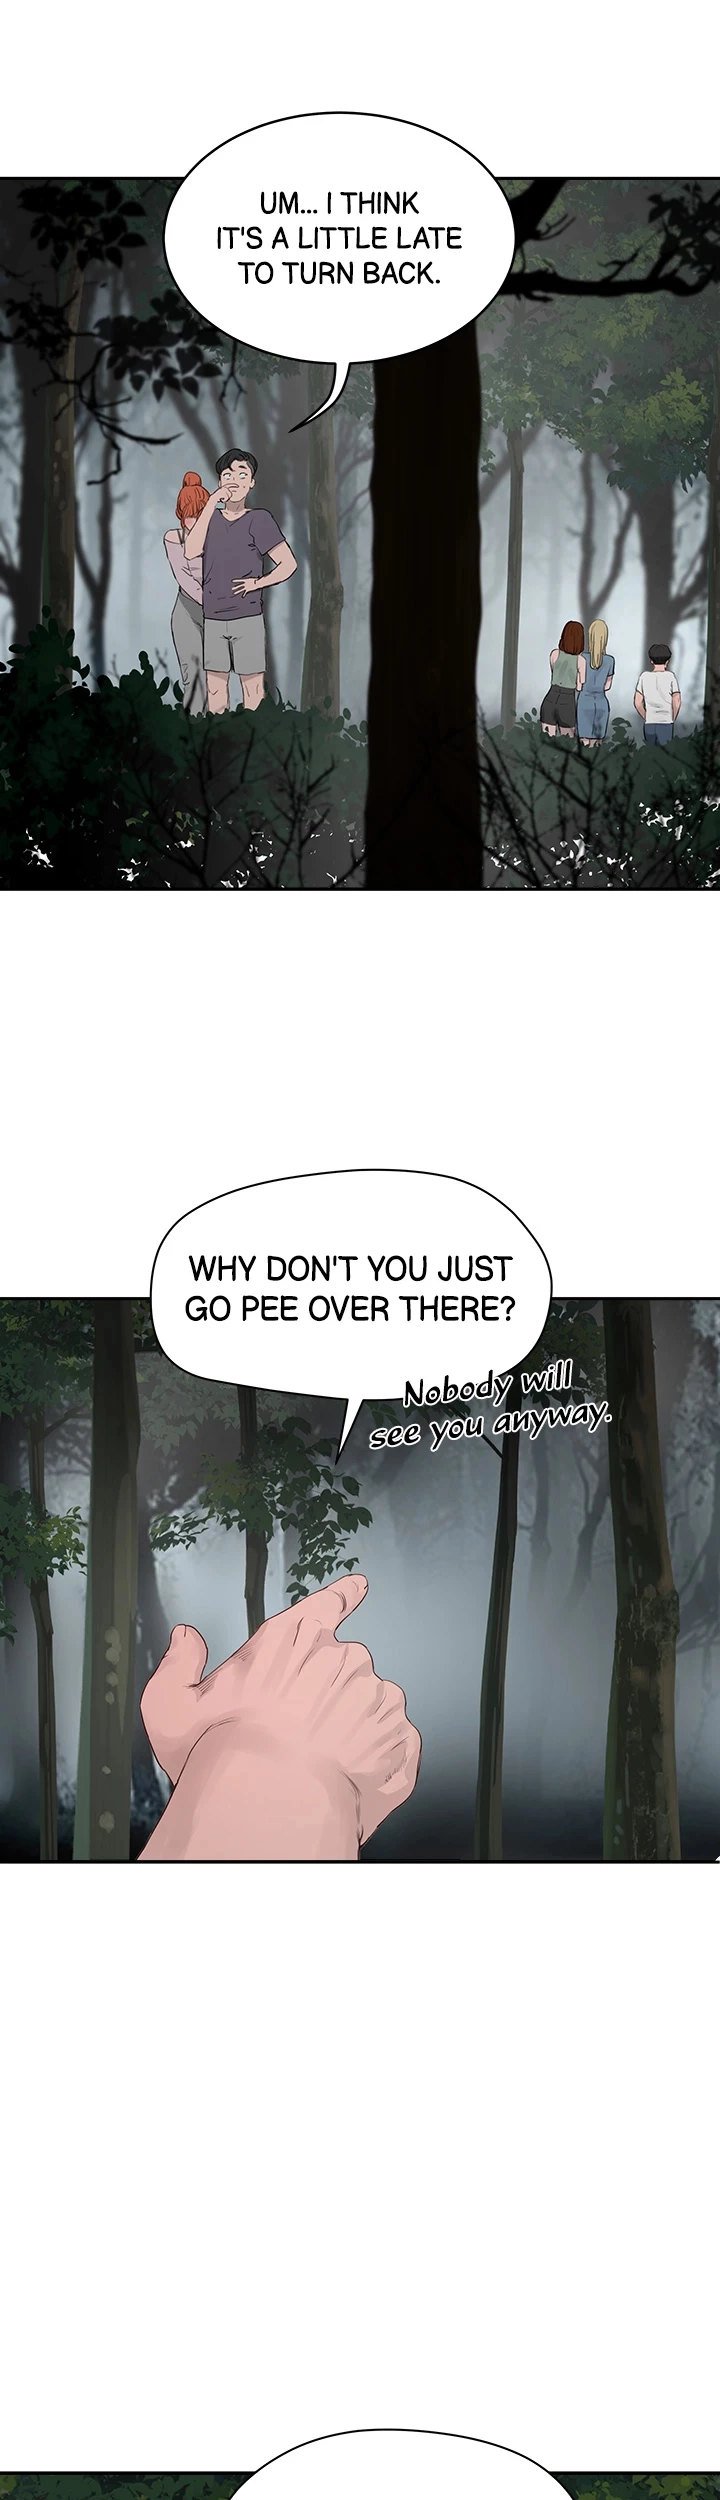 in-the-summer-chap-34-27